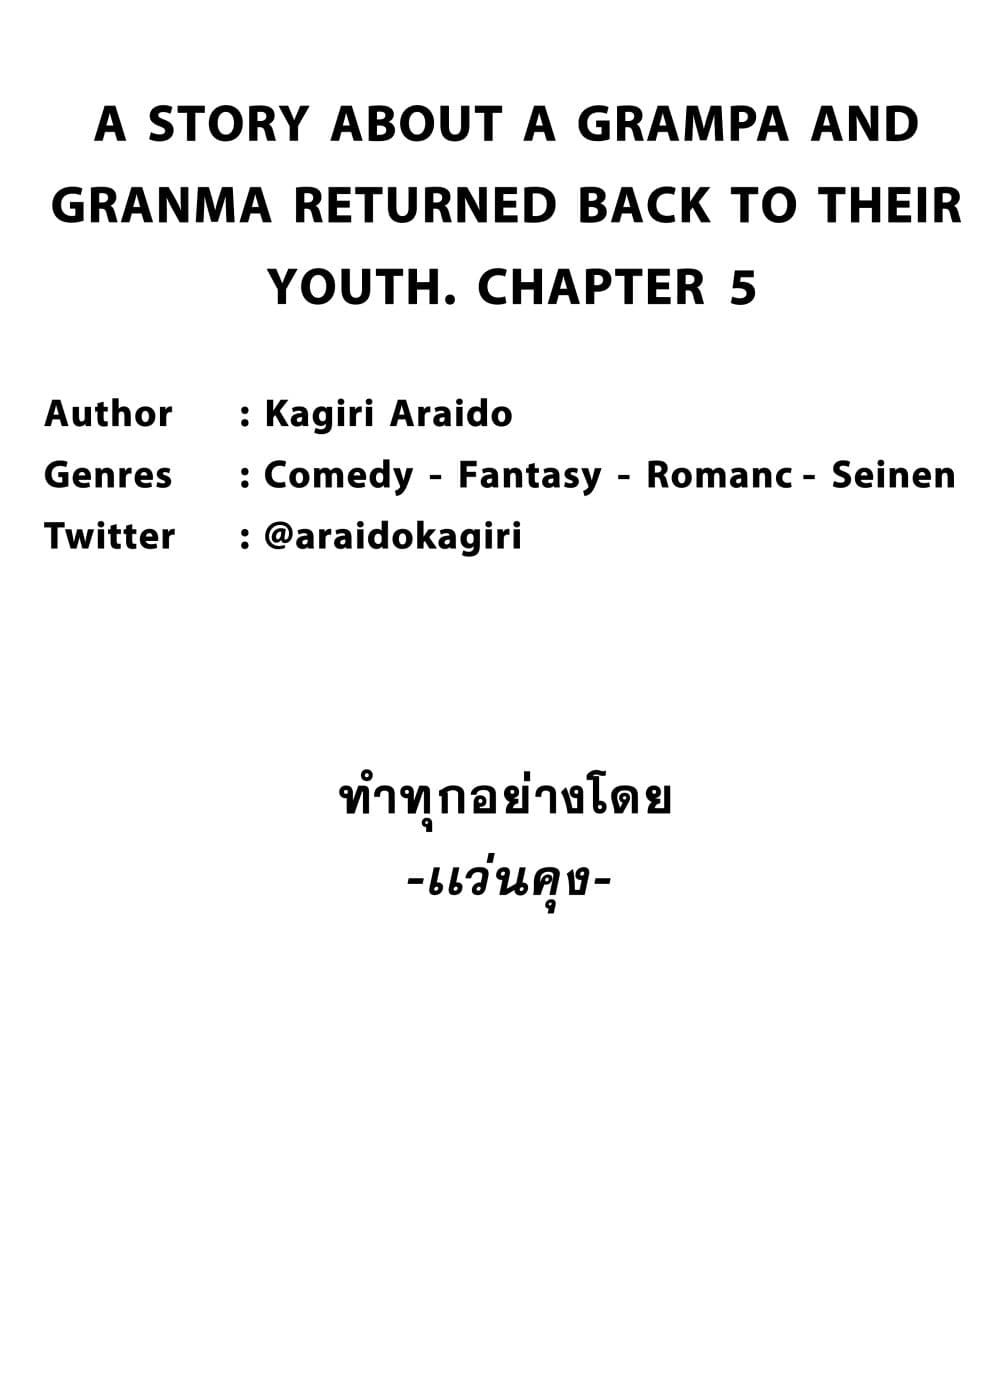 A Story About A Grampa and Granma Returned Back to their Youth คู่รักวัยดึกหวนคืนวัยหวาน 5-5